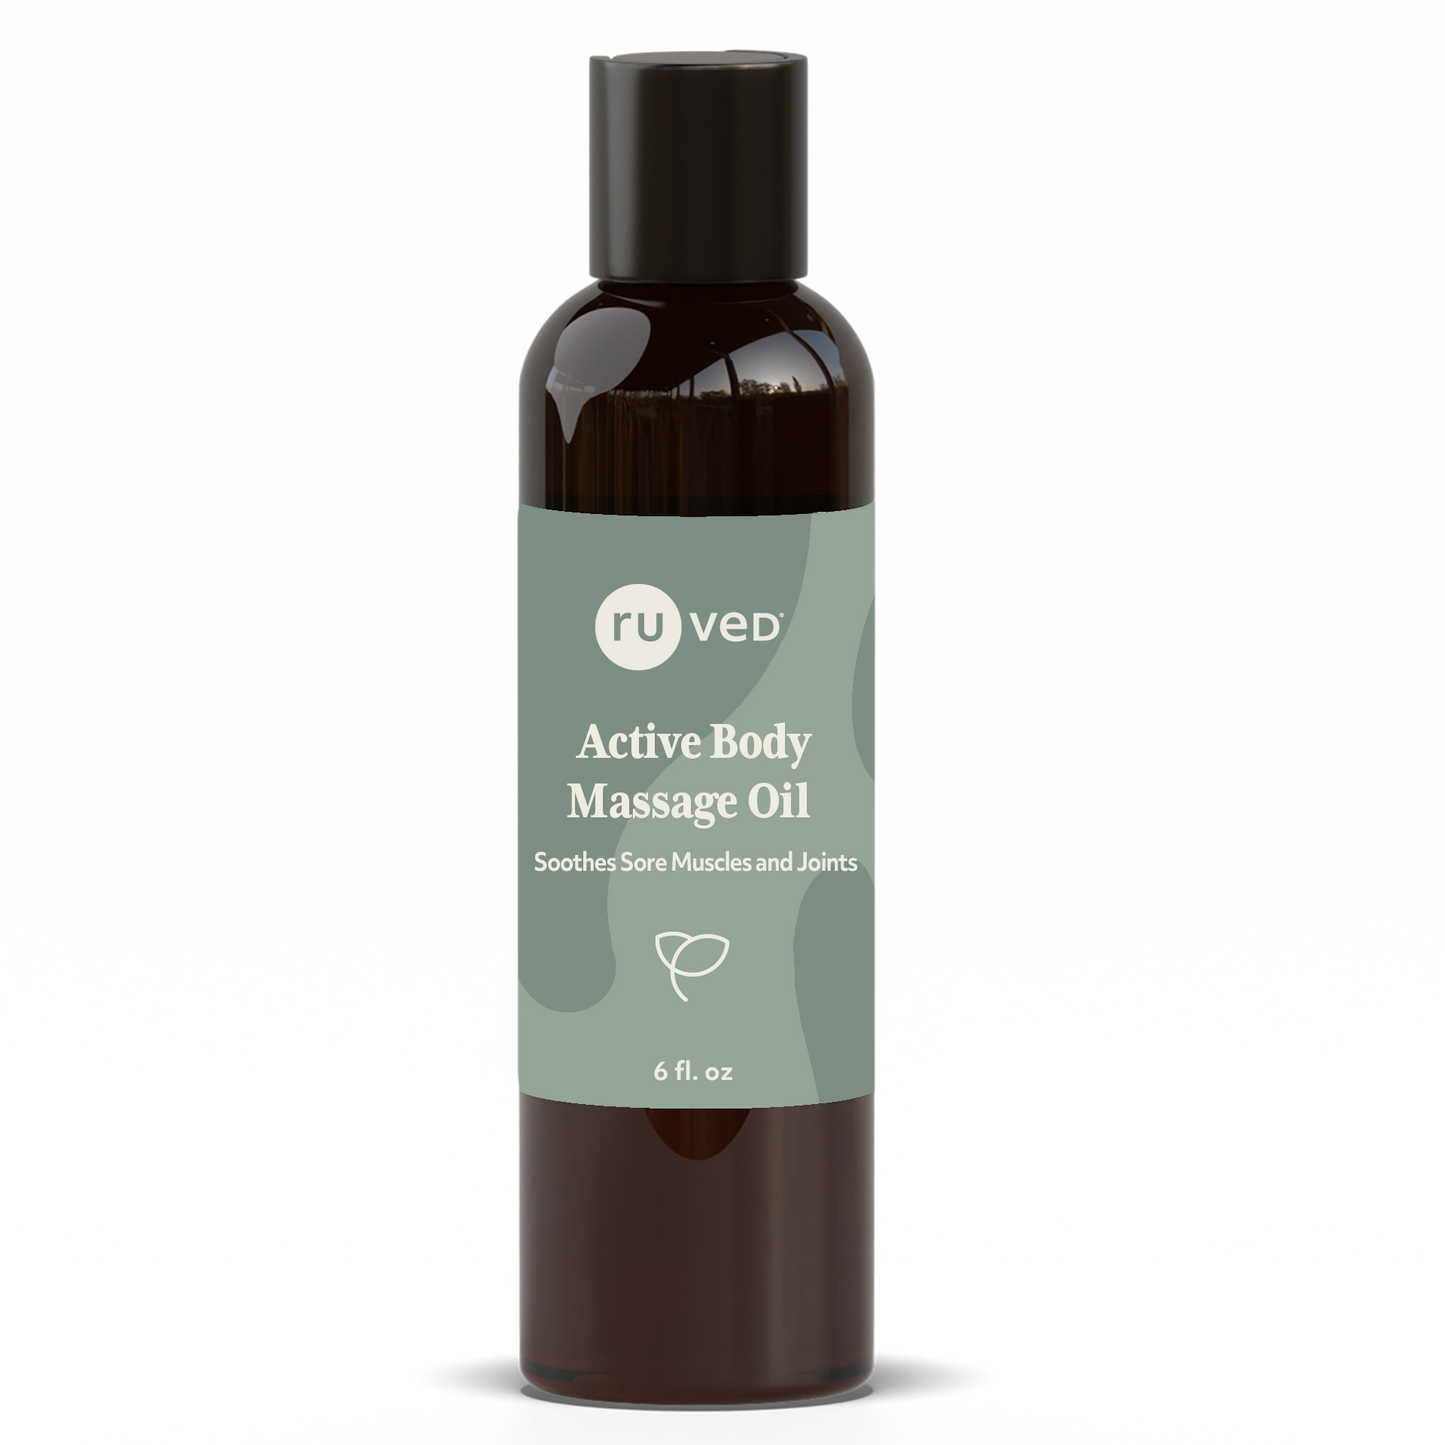 Active Body Massage Oil - Organic Blend for Muscle Relief and Relaxation, 100ml Bottle.